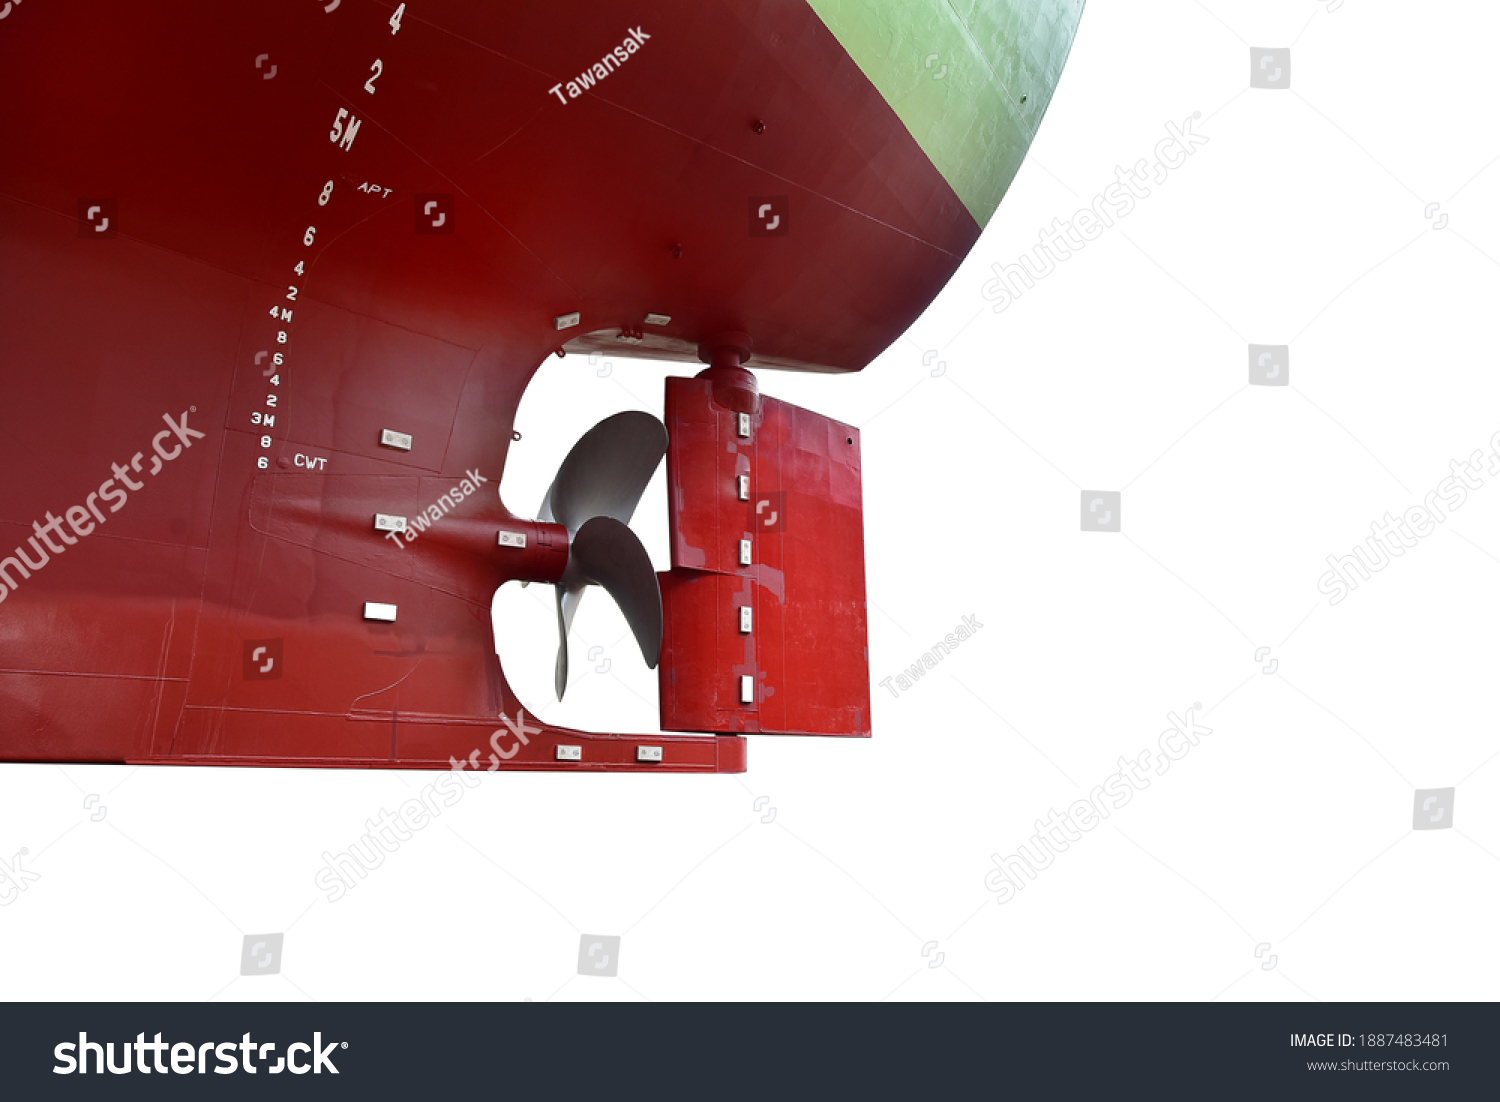 Ship Rudder with Propeller ship at stern isolated on white background #1887483481